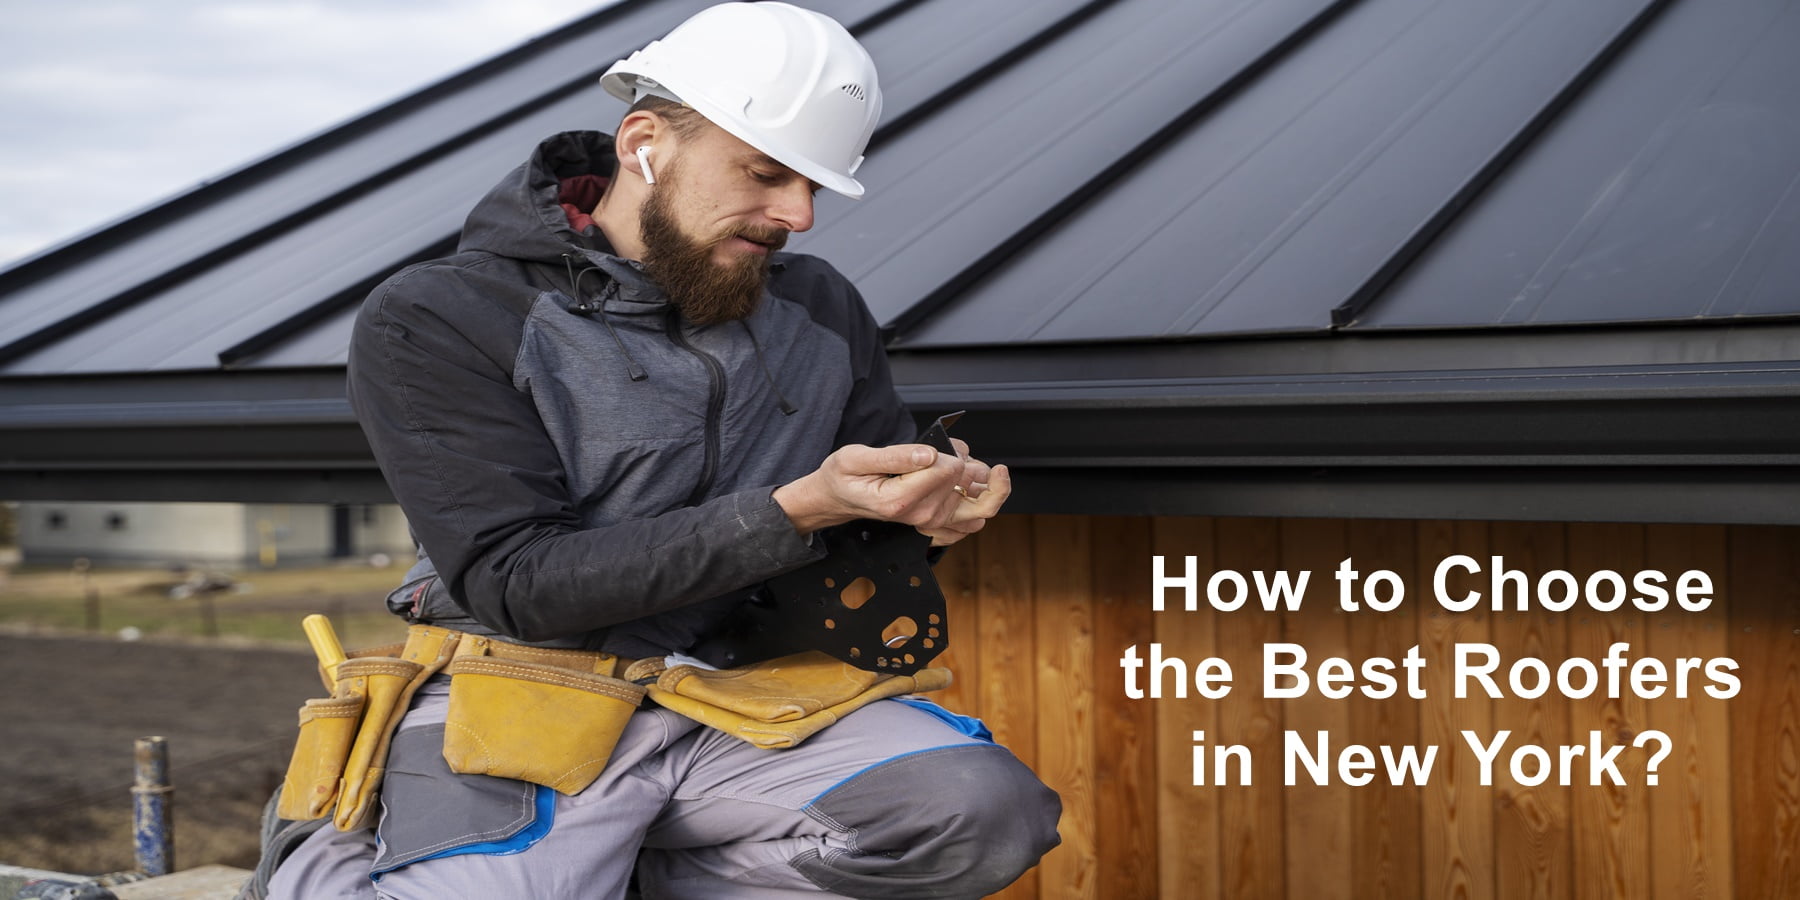 How to Choose the Best Roofers in New York